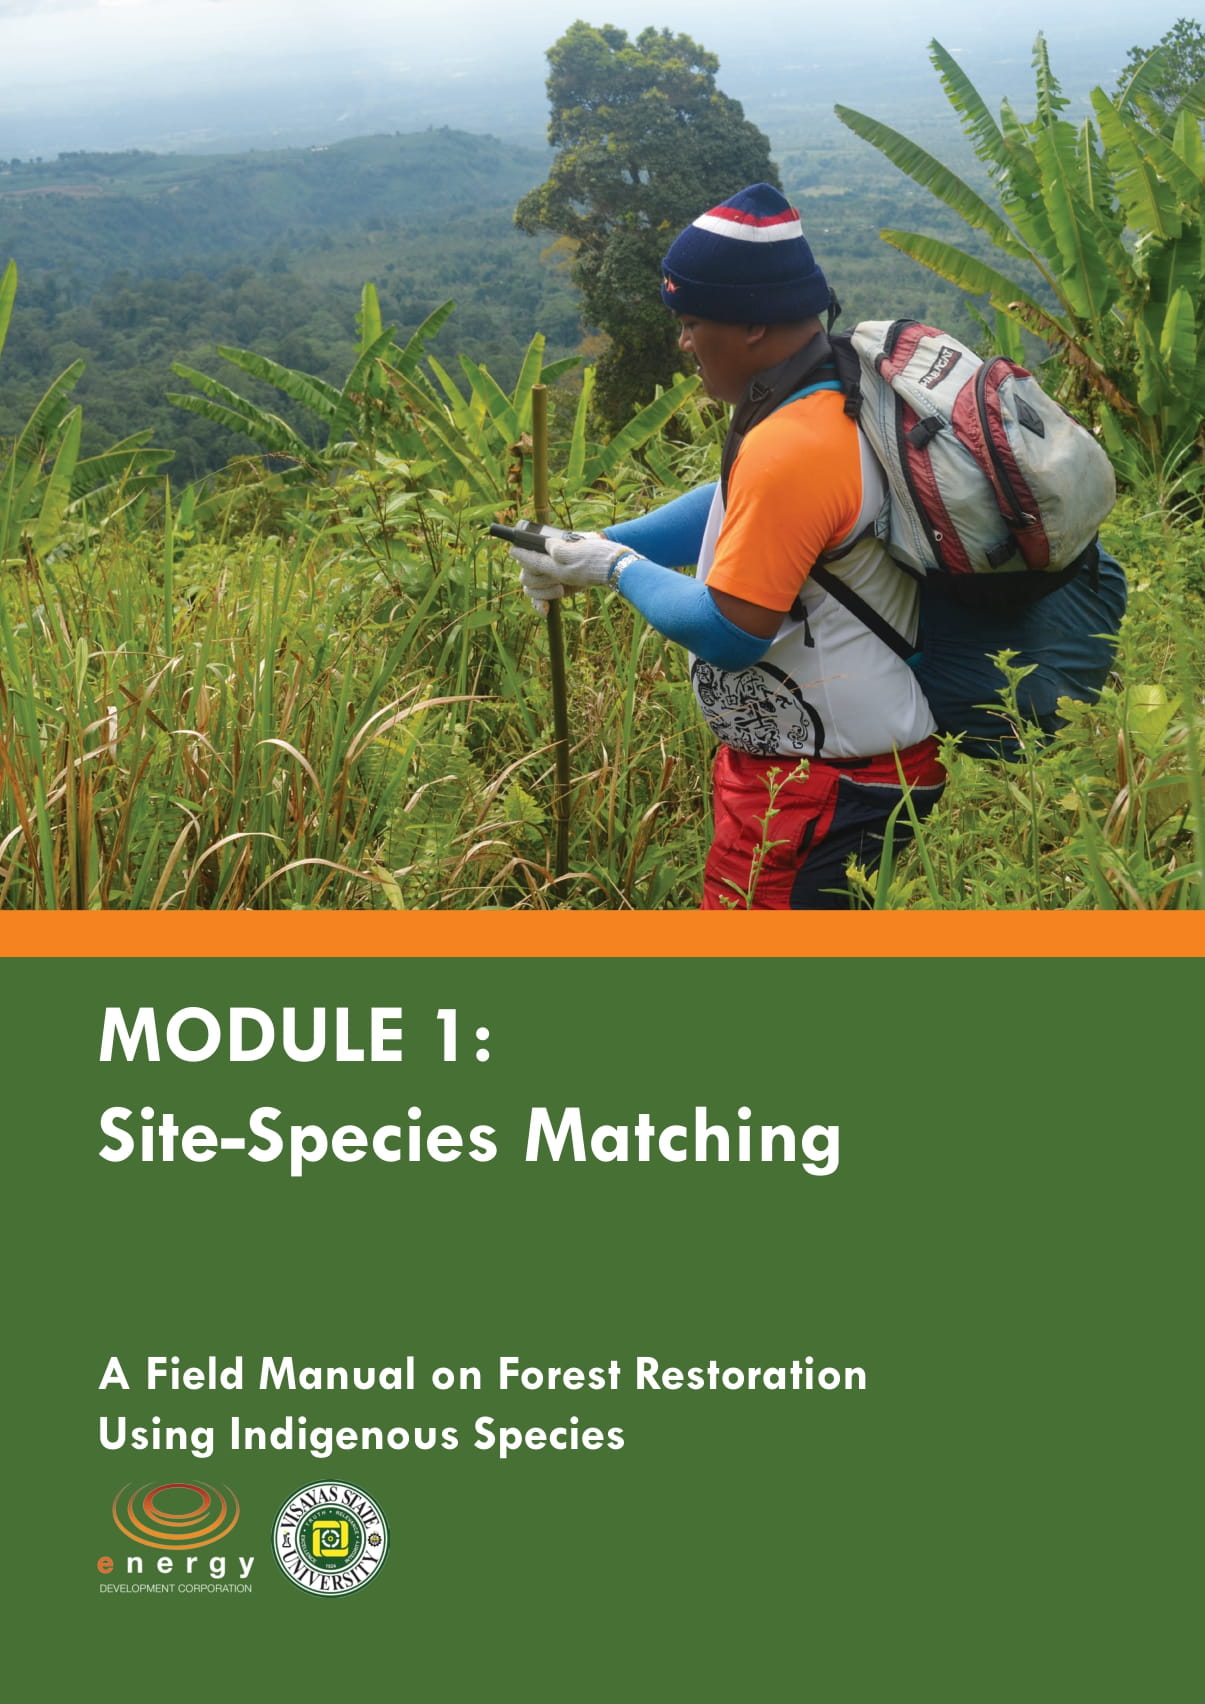 Copy of Copy of 2016 Forest Restoration Manual - Module 1 Site Species Matching-01